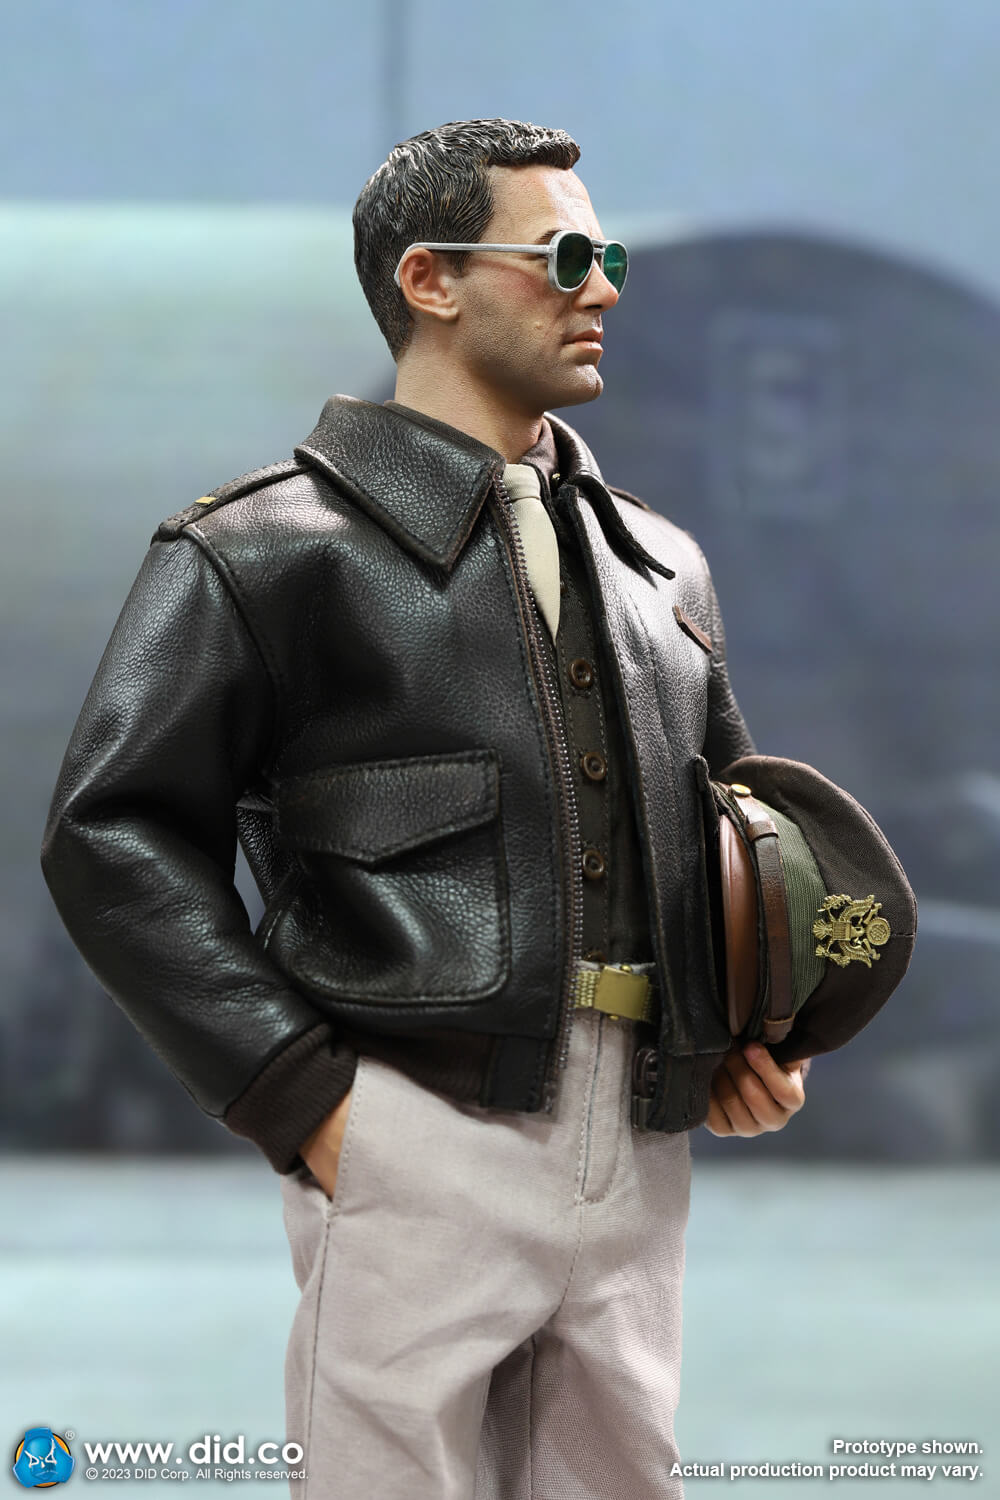 Pilot - NEW PRODUCT: DiD: A80167 WWII United States Army Air Forces Pilot – Captain Rafe 2720